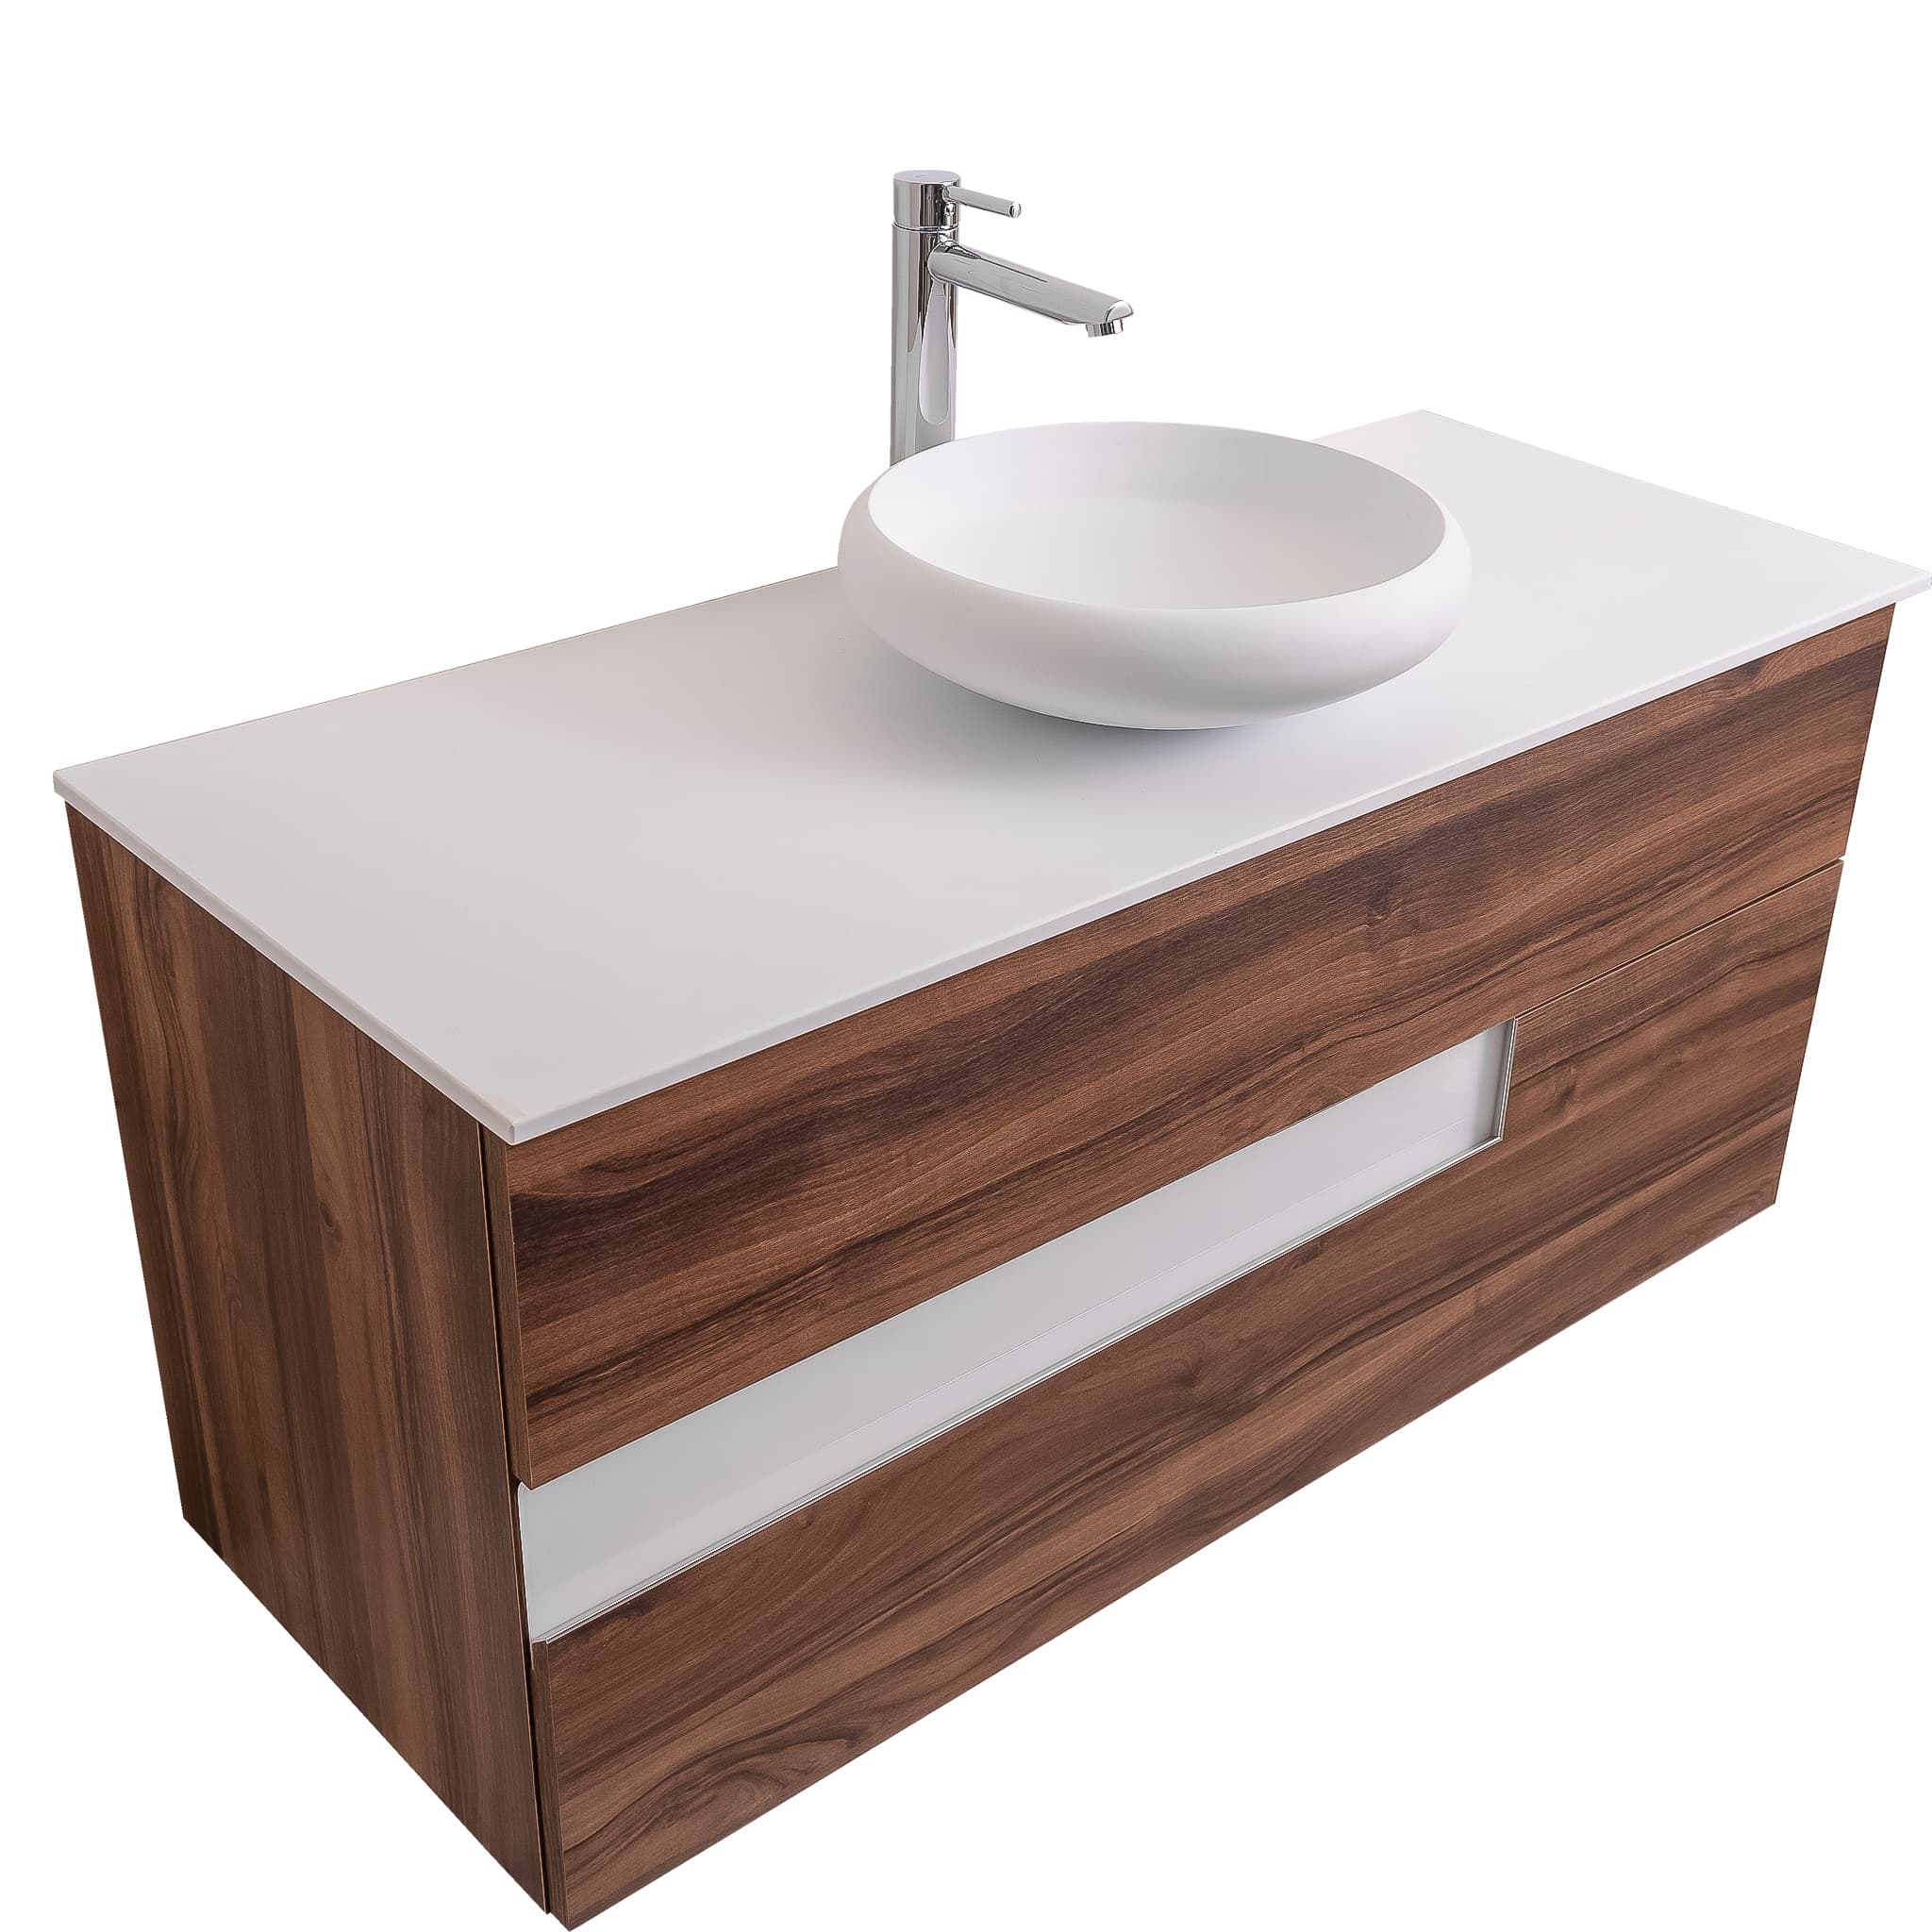 Vision 47.5 Valenti Medium Brown Wood Cabinet, Solid Surface Flat White Counter And Round Solid Surface White Basin 1153, Wall Mounted Modern Vanity Set